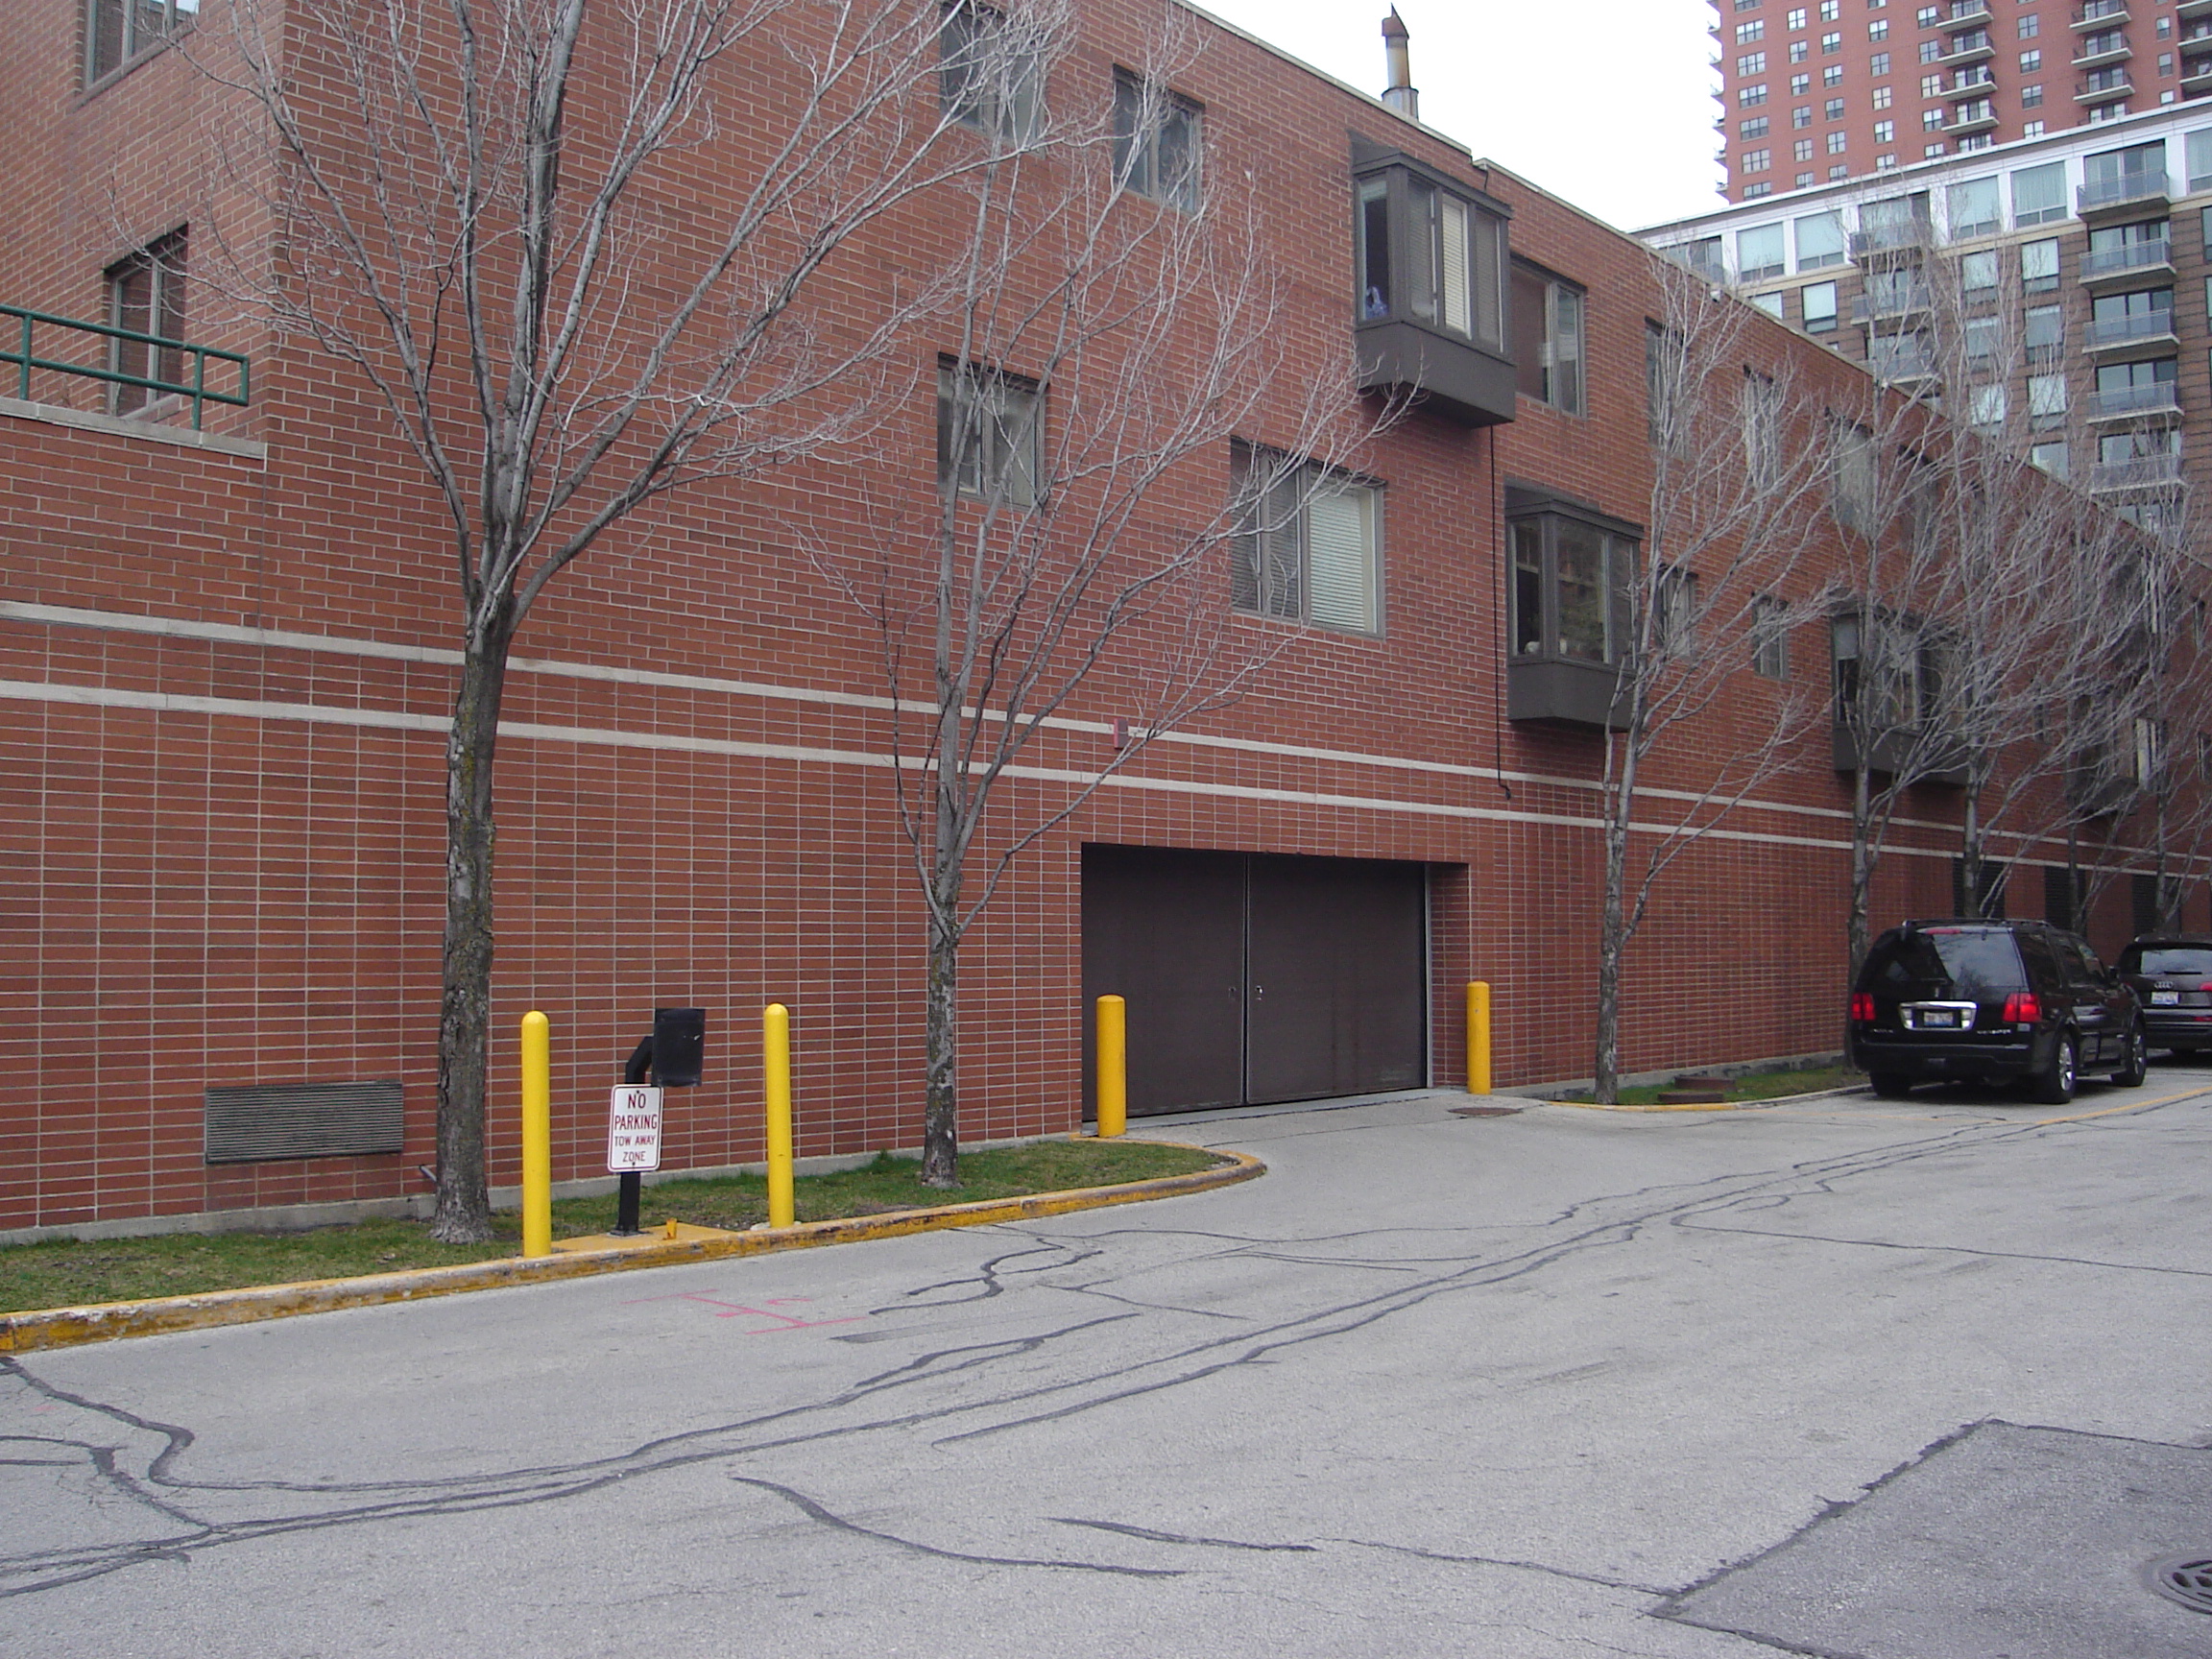 Parking, Garages And Car Spaces For Rent - Downtown Enclosed Parking For Rent